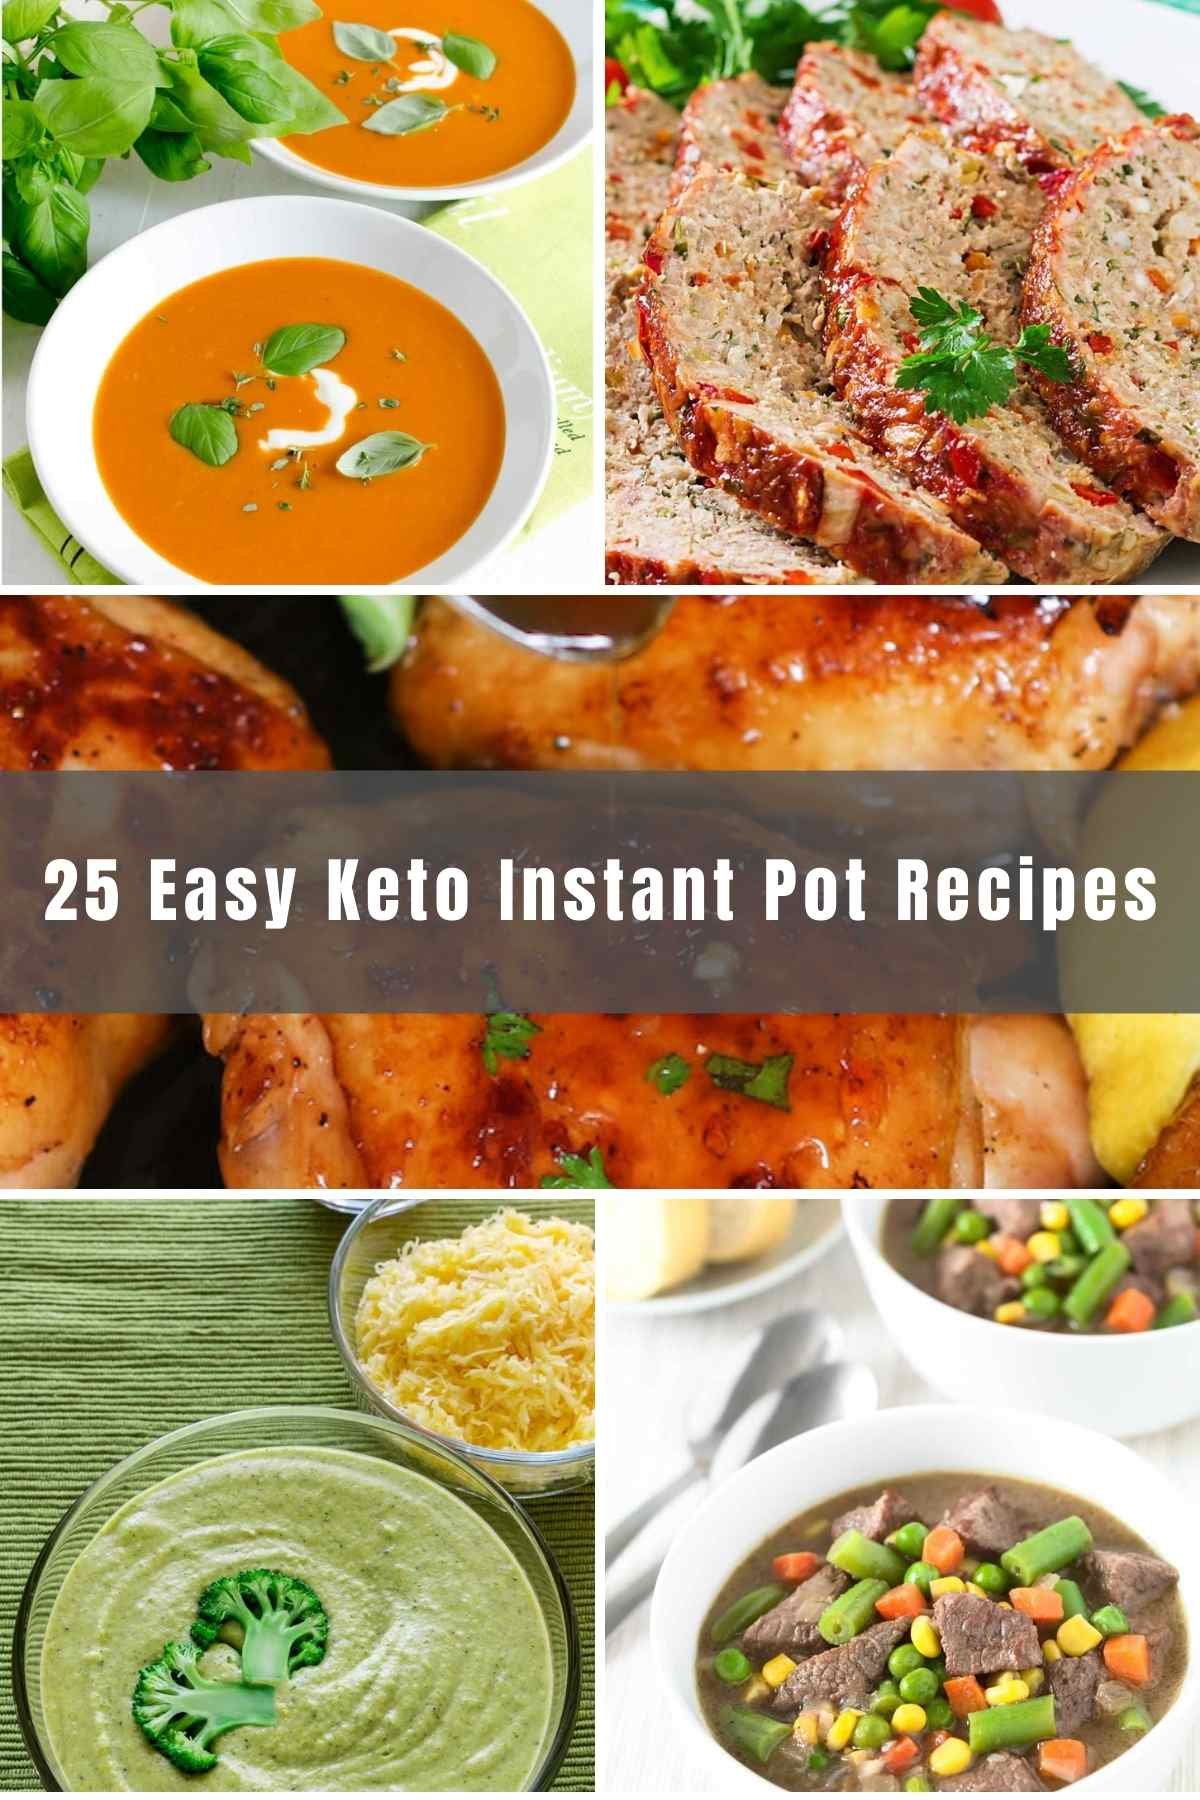 25 Easy Keto Instant Pot Recipes (Low Carb and Delicious)